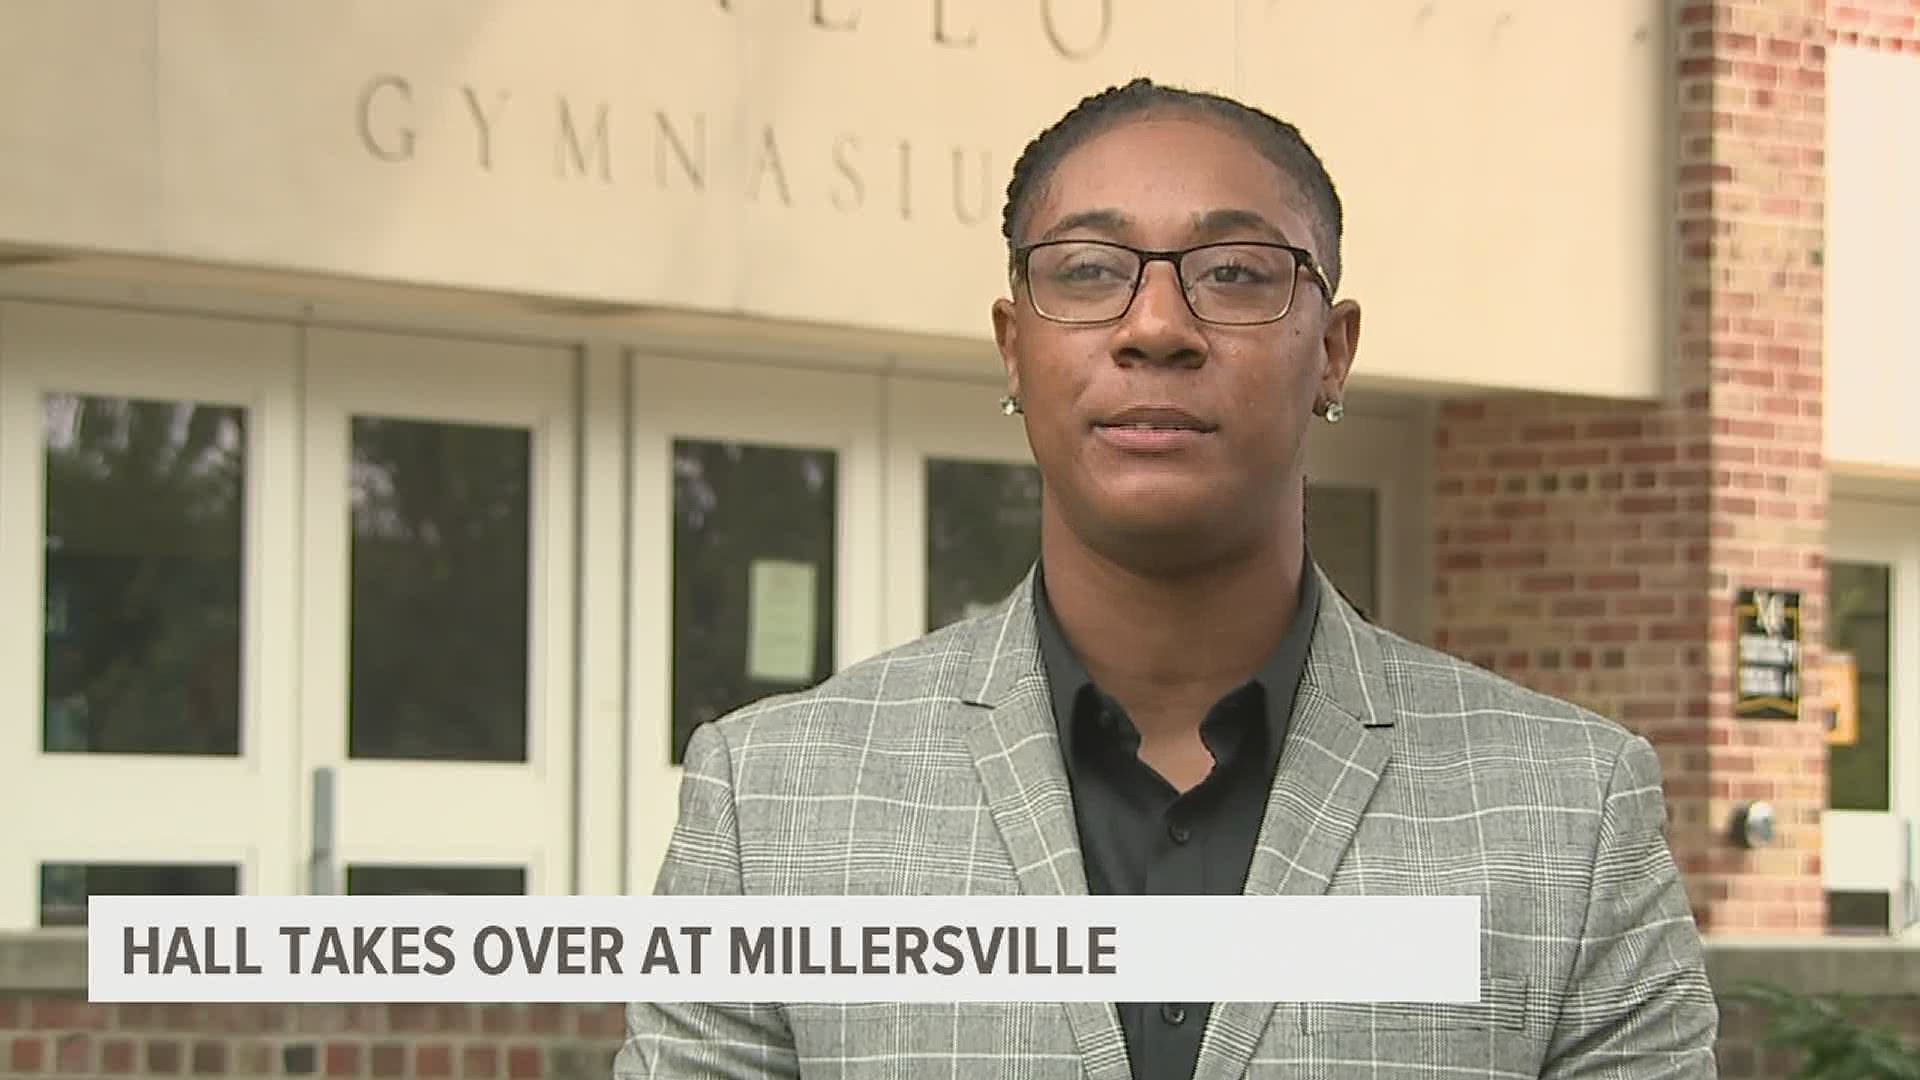 For the first time in 30 years, Millersville University has a new women's basketball coach.